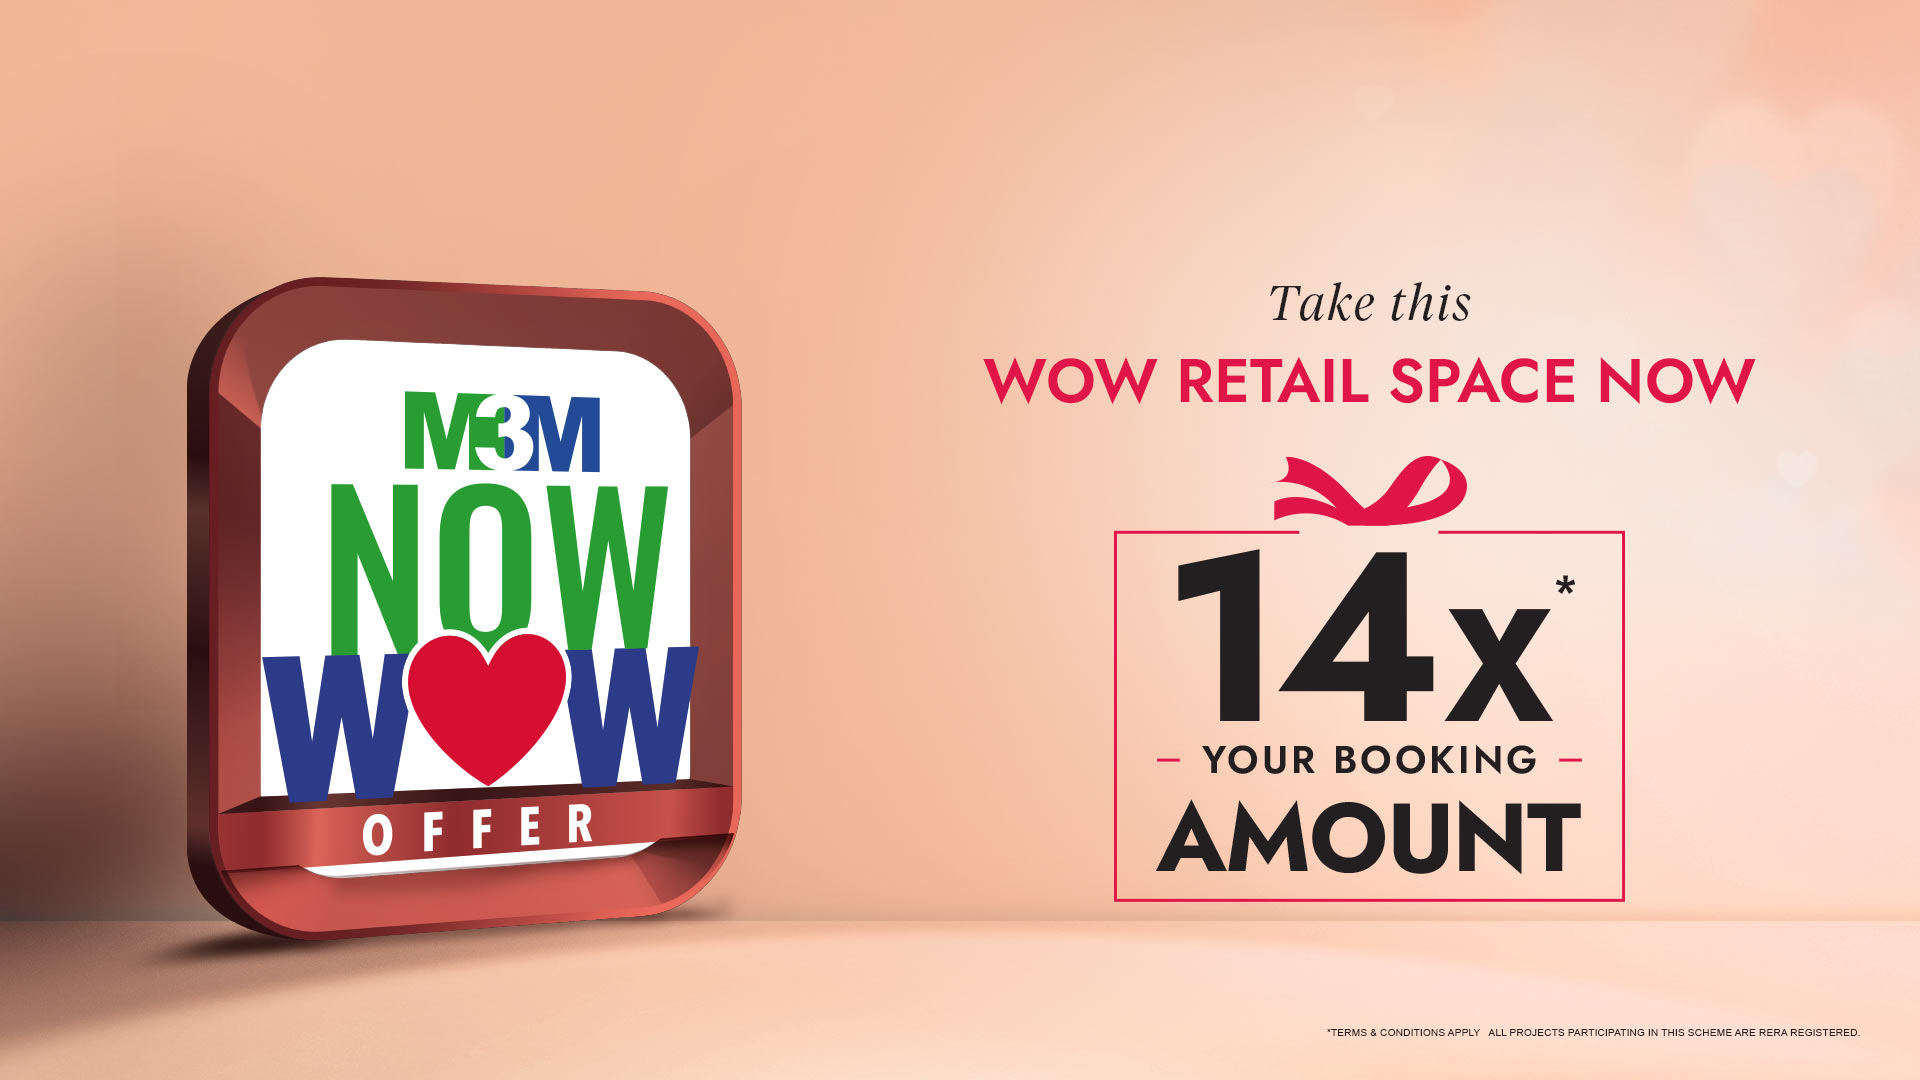 m3m now wow offer